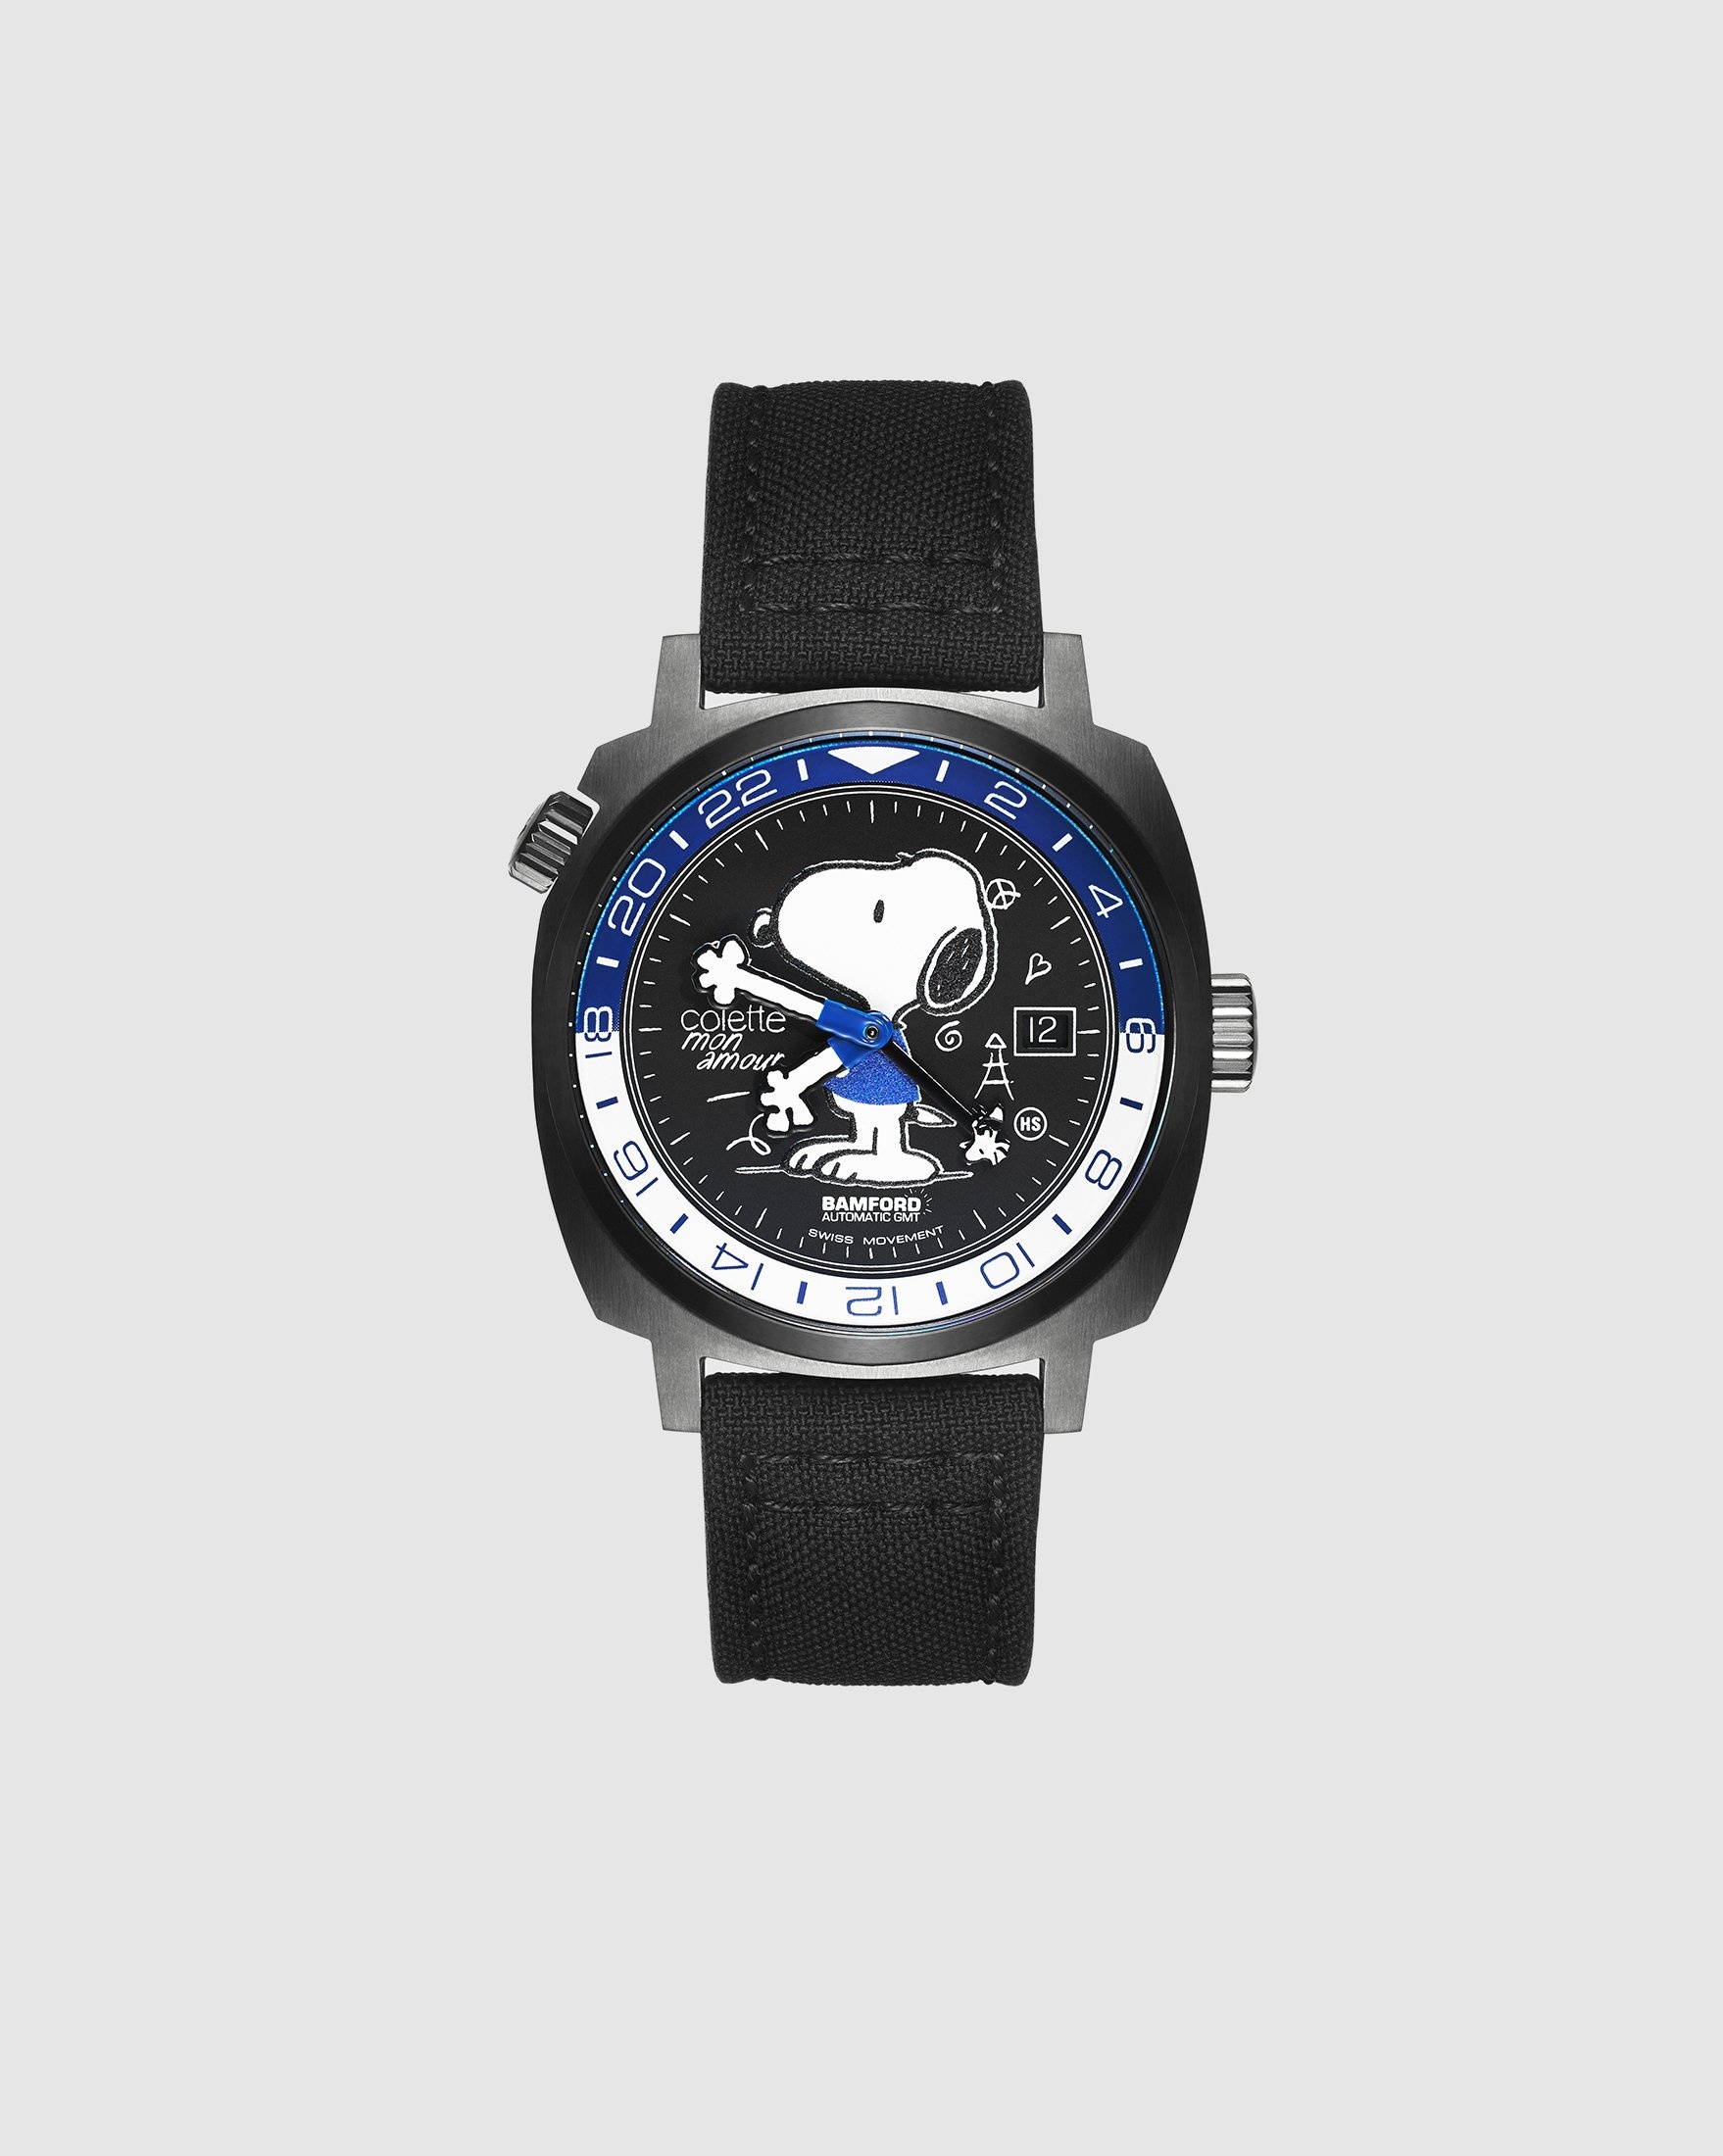 Colette Mon Amour – Bamford Snoopy Watch Black - Watches - Black - Image 1